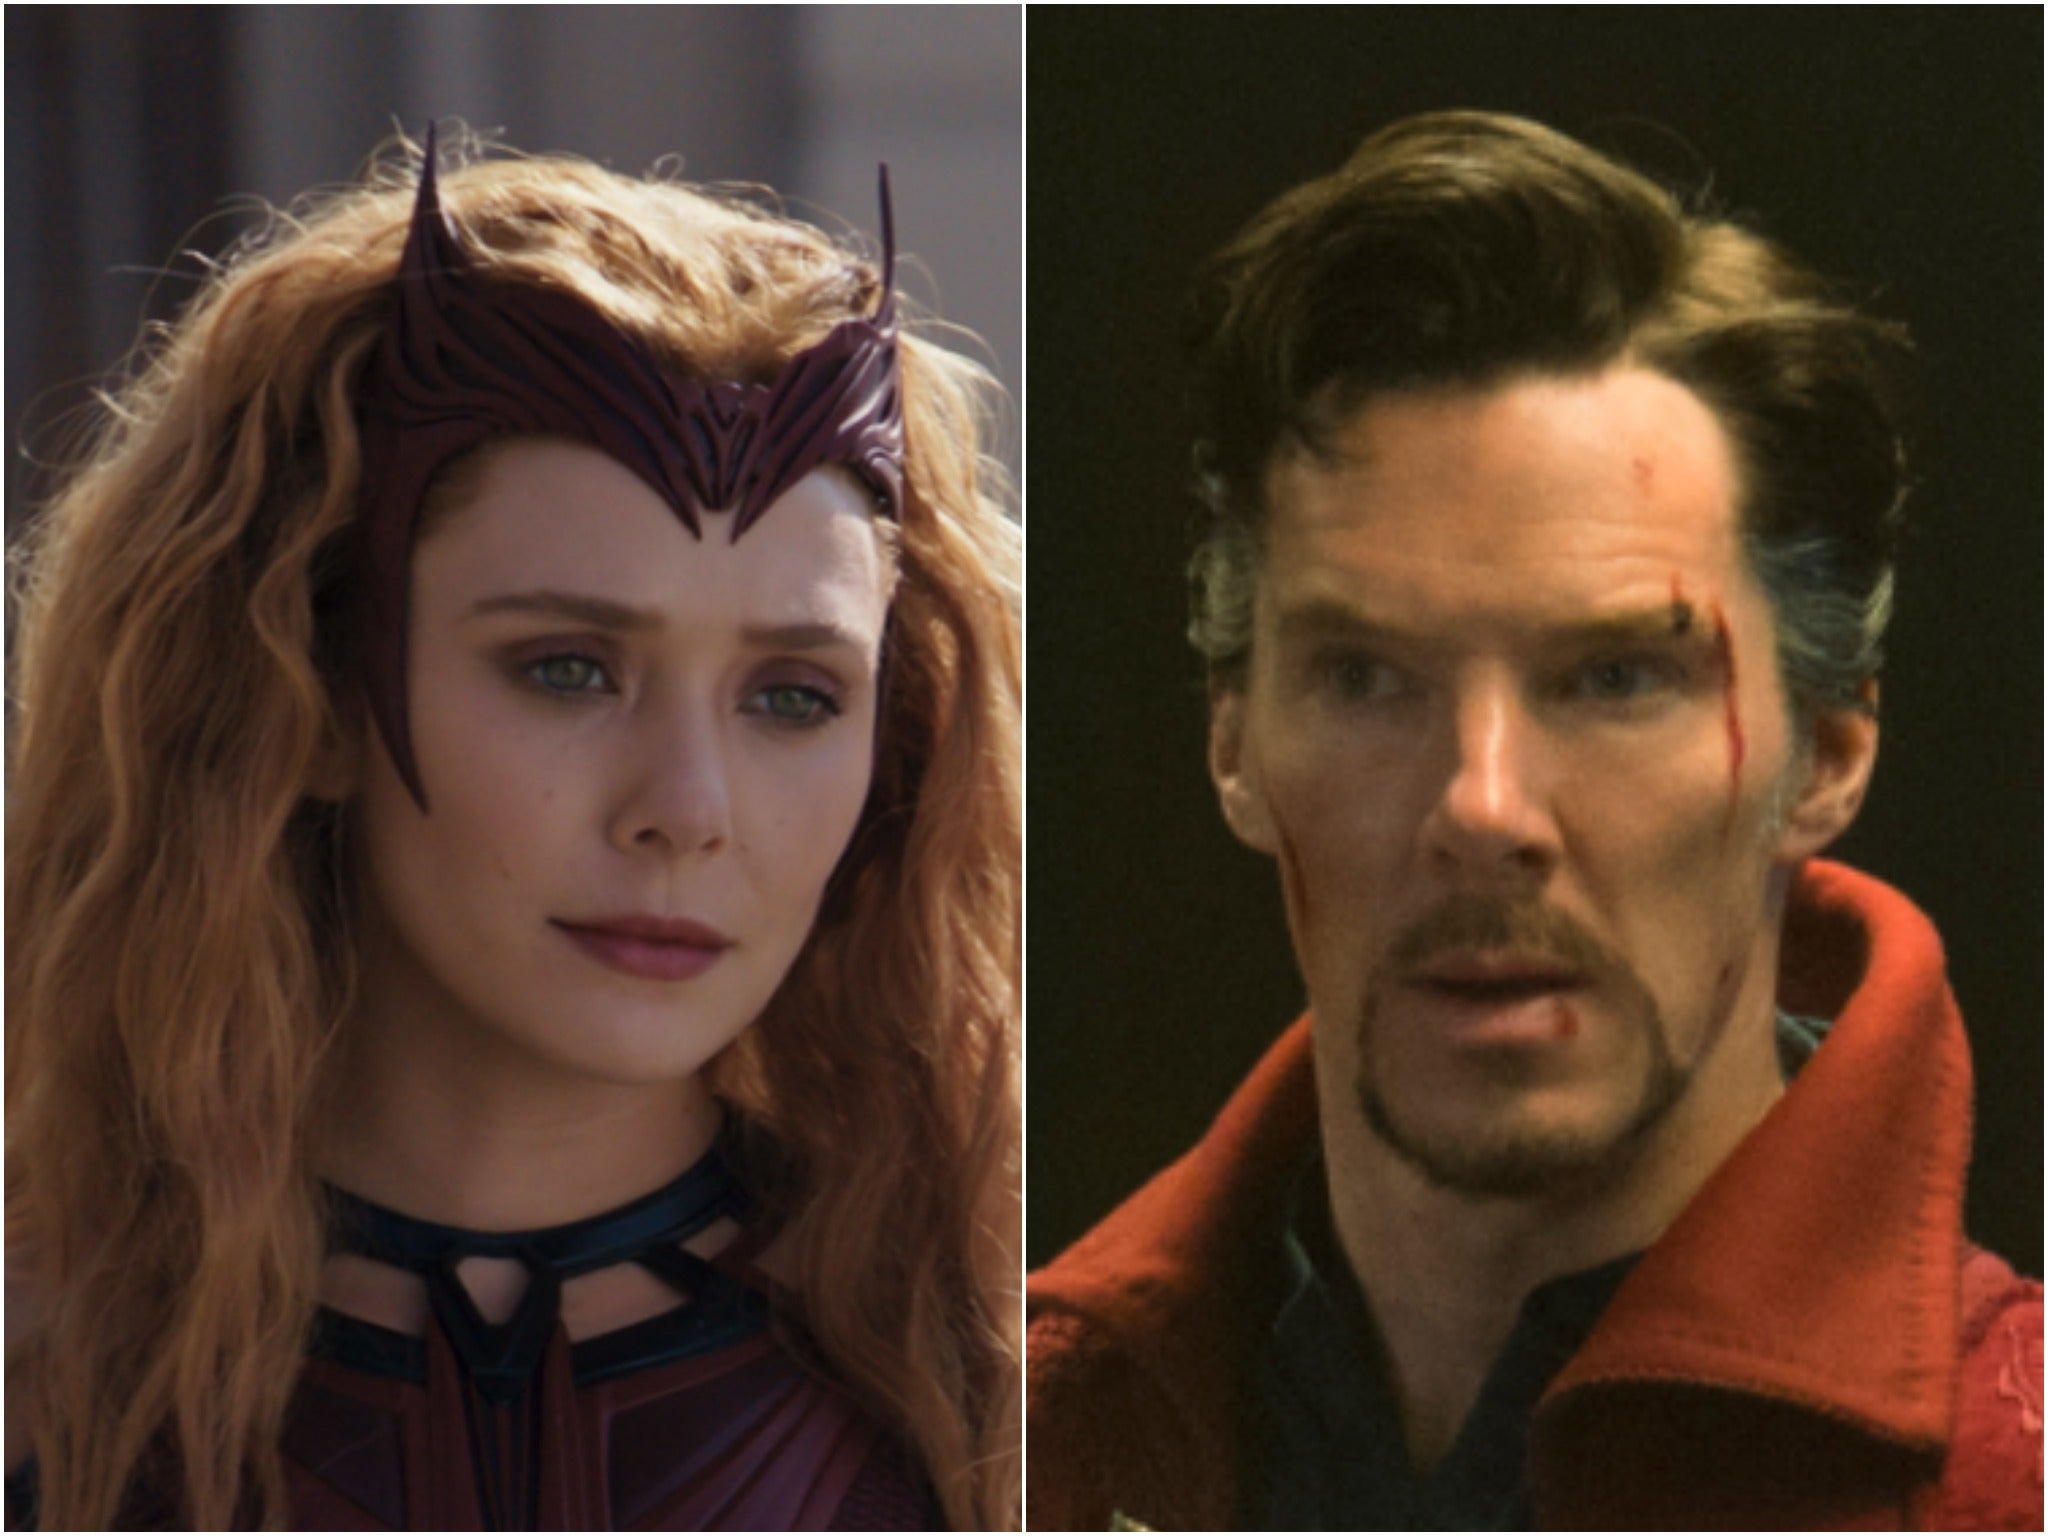 Headline could link to ‘Doctor Strange’ sequel in which Scarlet Witch will appear